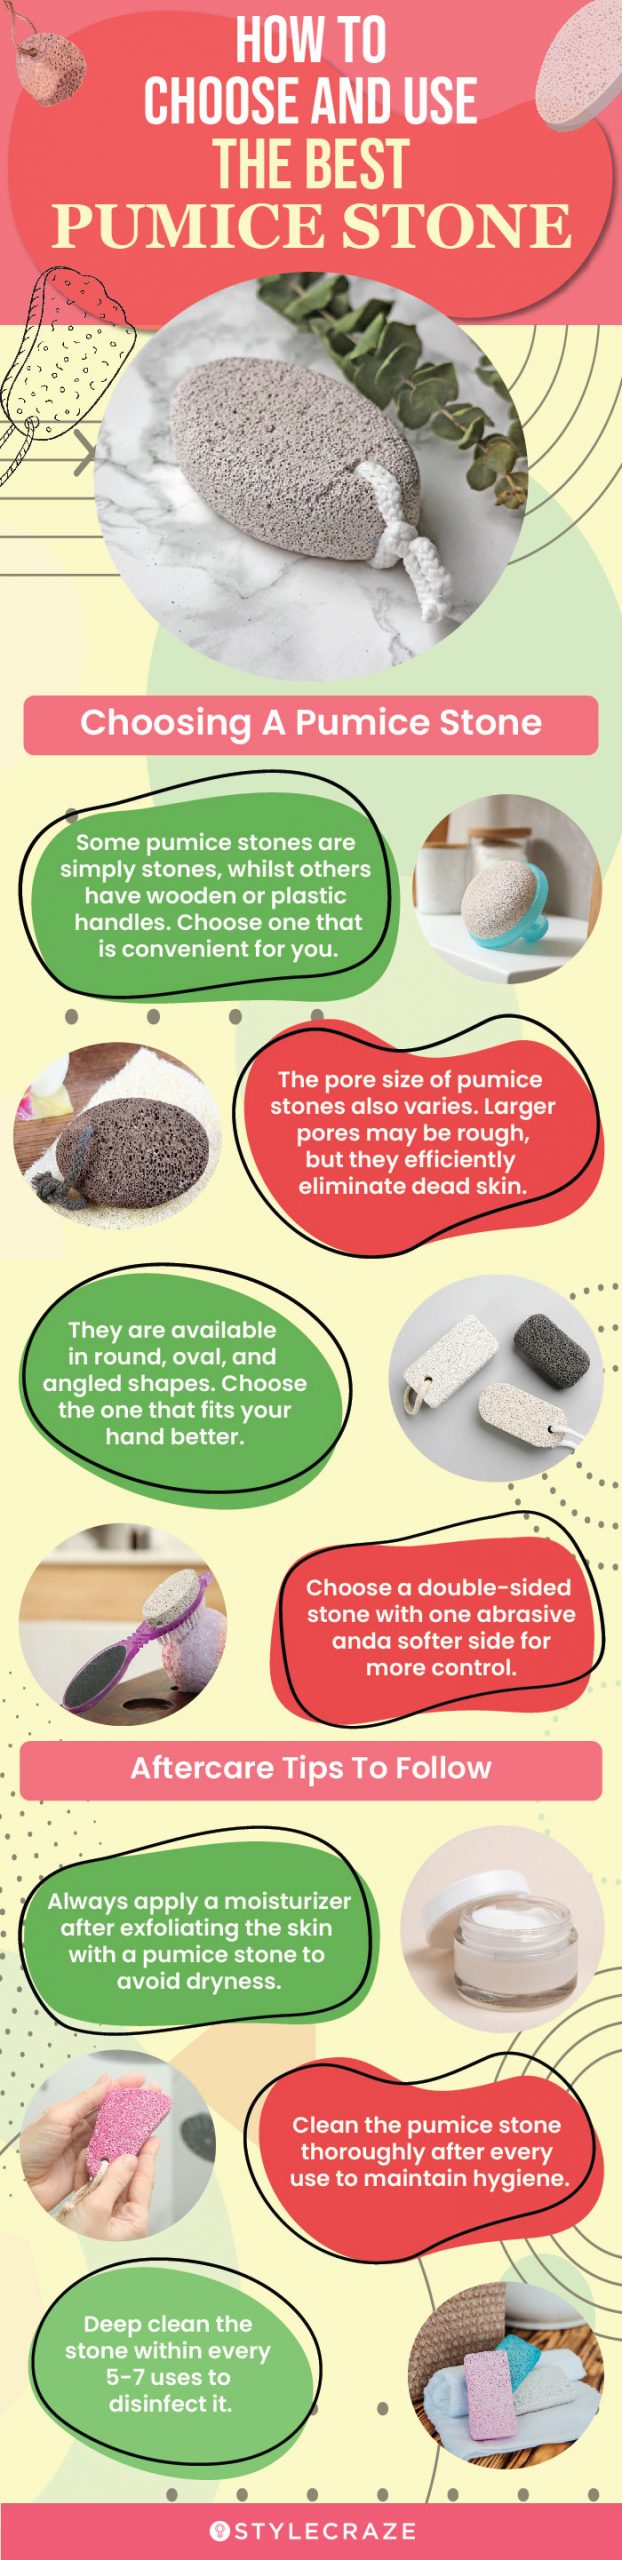 How To Choose And Use The Best Pumice Stone (infographic)